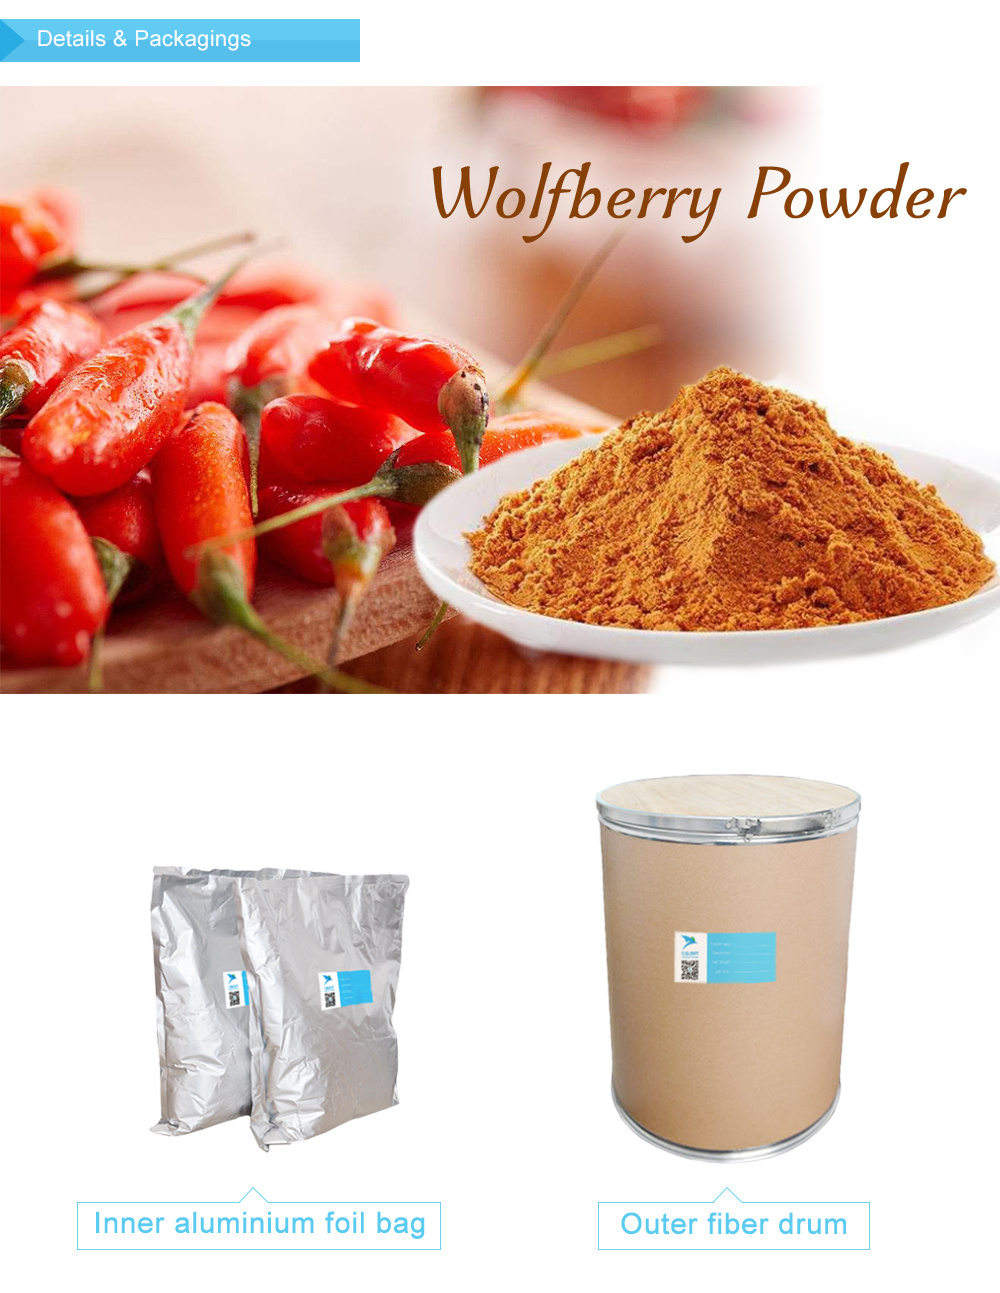 Wolfberry Powder for Healthy Drinks